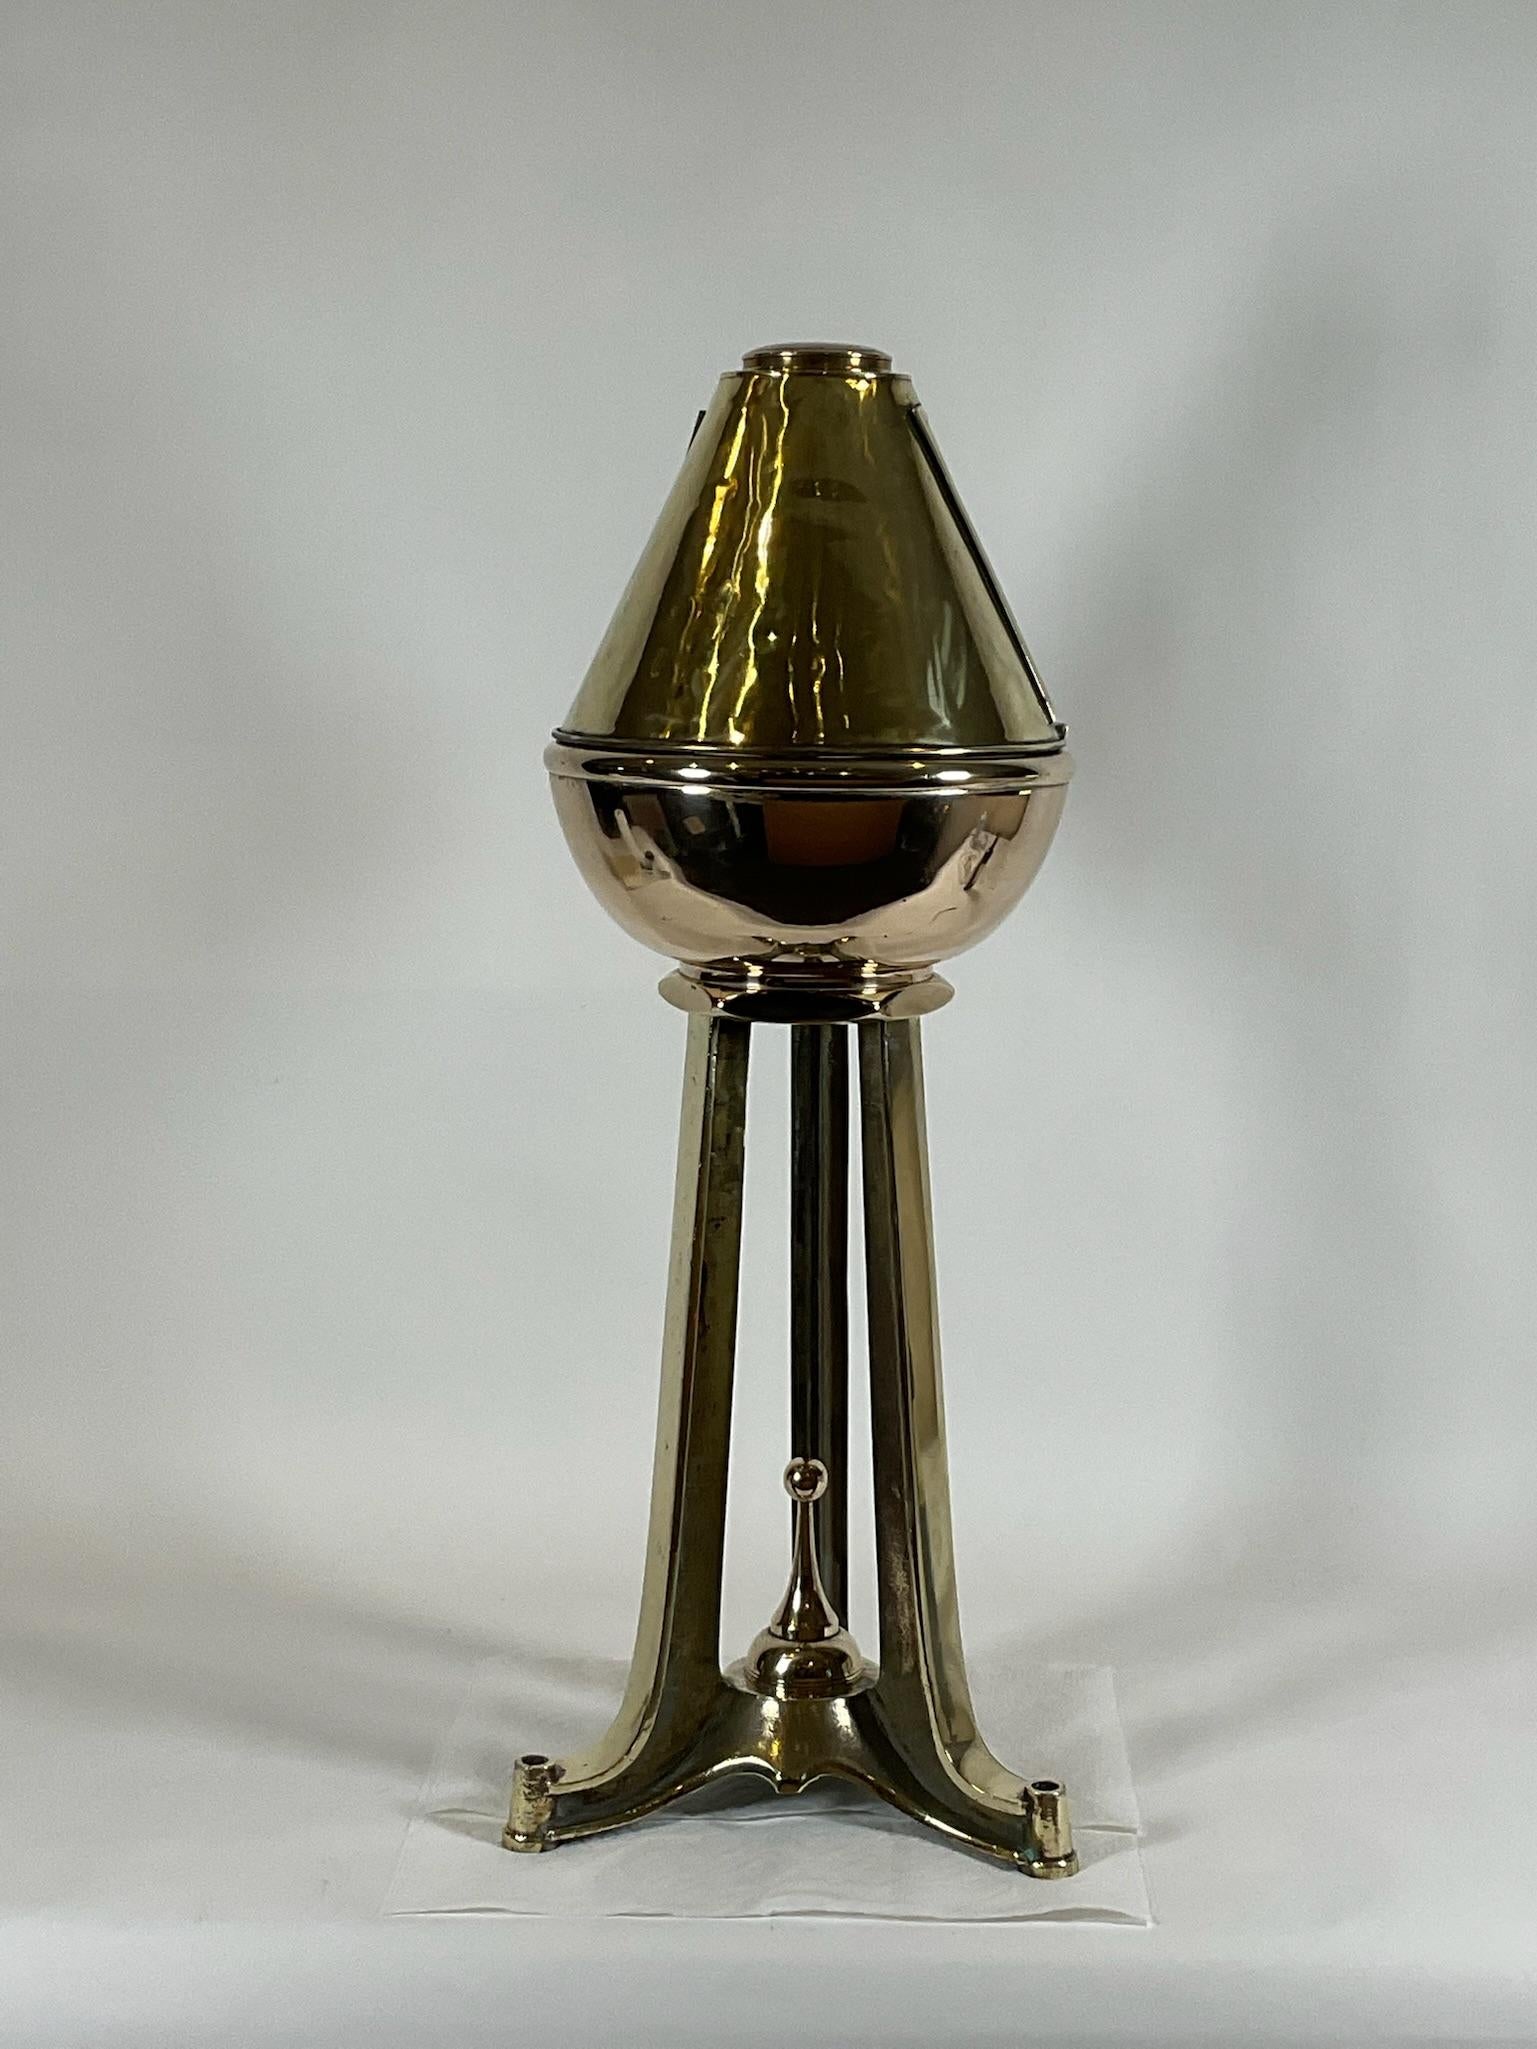 Brass Yacht Binnacle of the Highest Quality For Sale